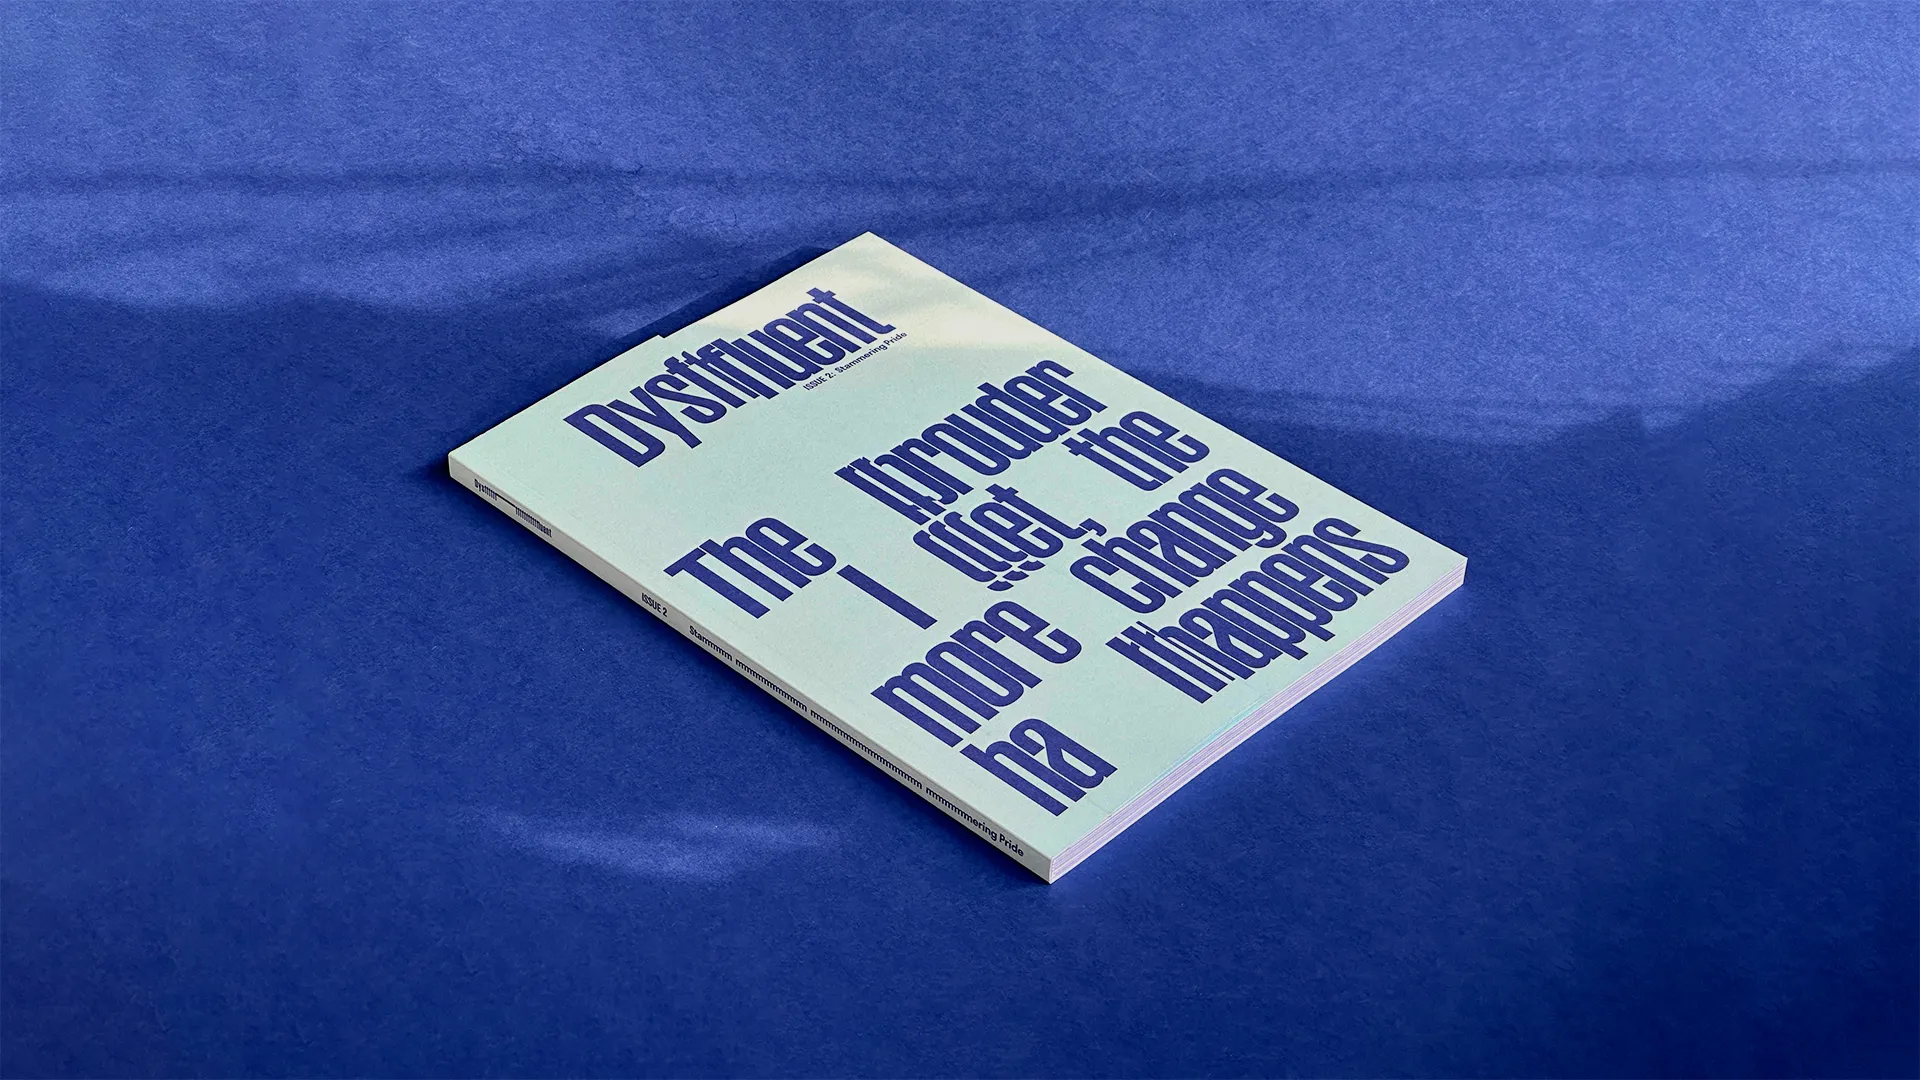 A magazine on a dark blue surface. Its front cover is light seagreen with dark blue typography.